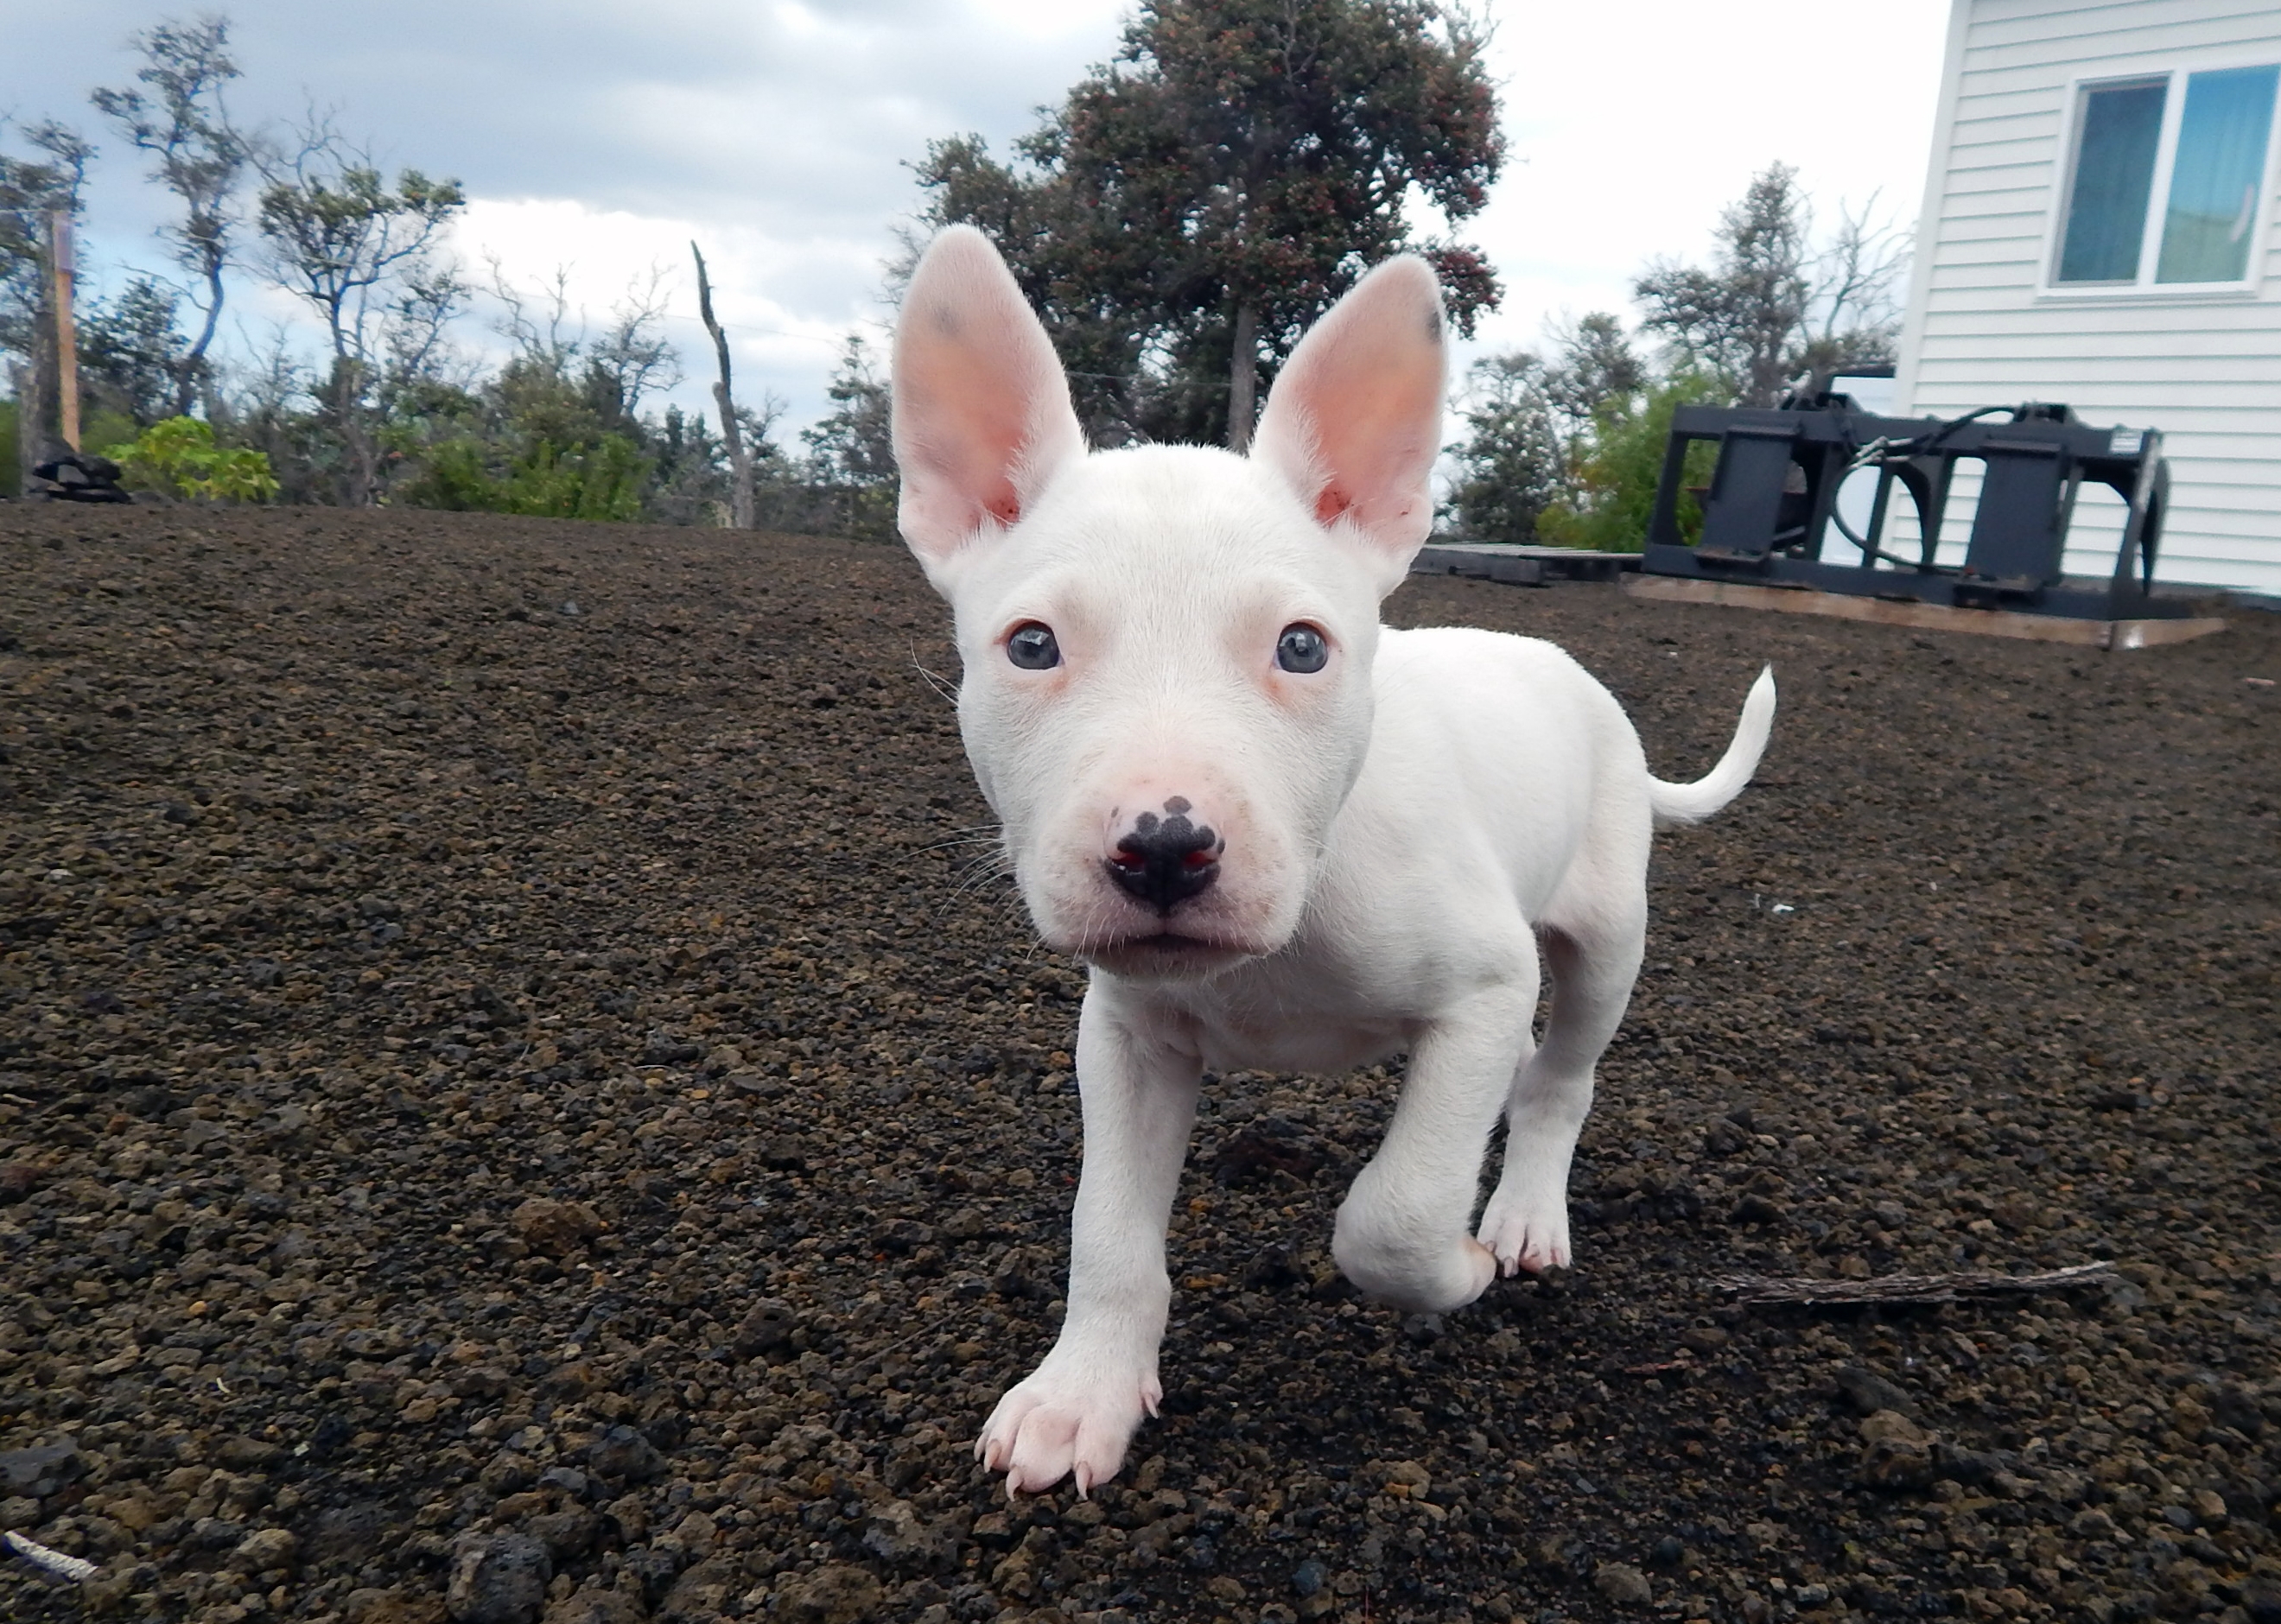 Puppy from Na'alehu - The Every Animal Project